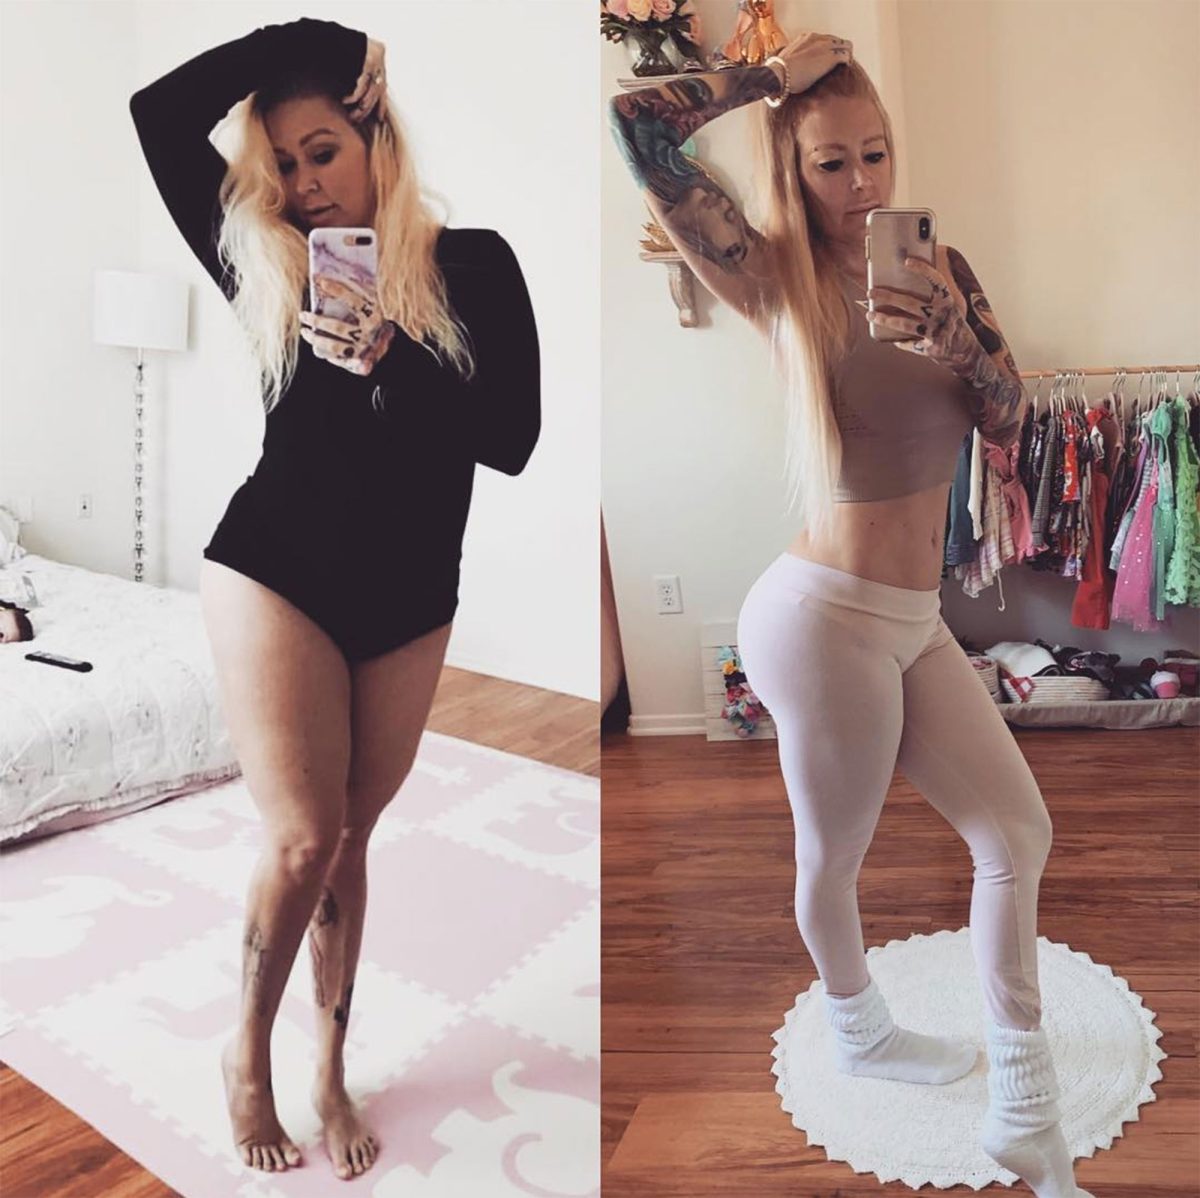 Jewish Porn Stars Weight Gain - Jenna Jameson Lost 80 Pounds Post-Baby: Pictures, Diet Tips